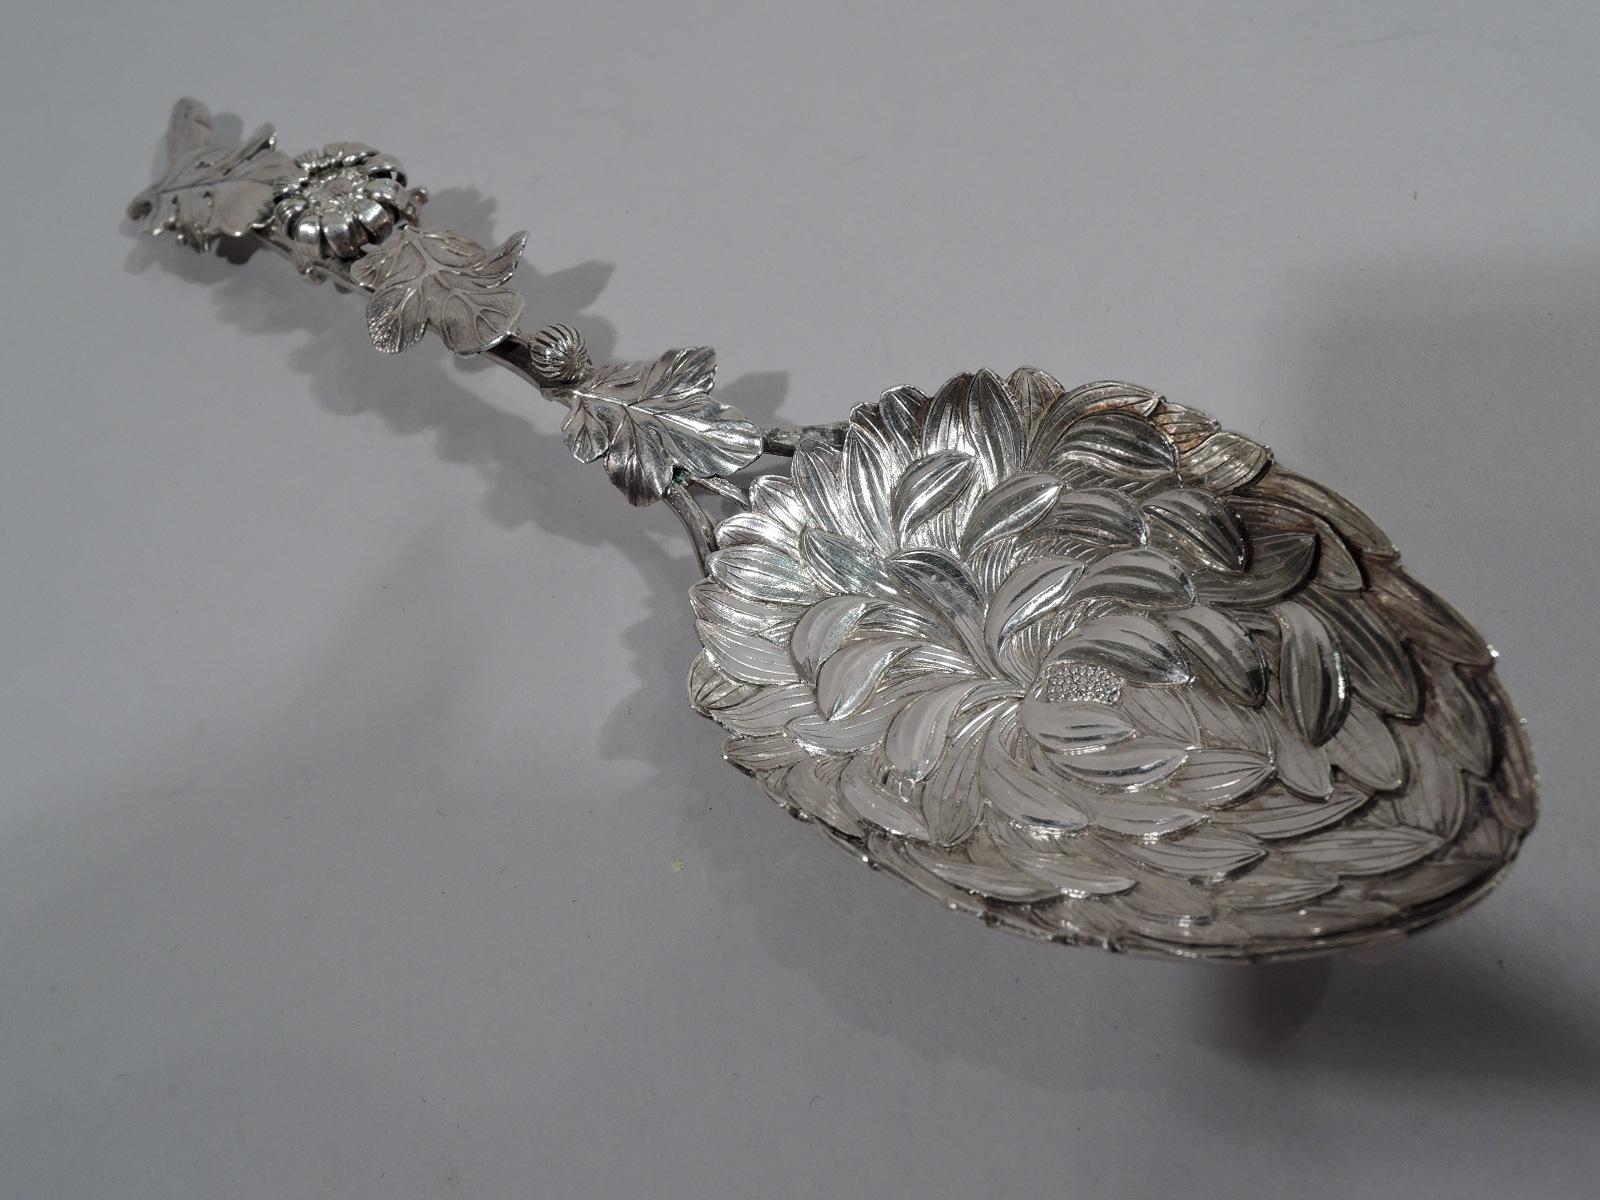 Meiji-era silver Chrysanthemum serving spoon, circa 1880. Oval flower head bowl with chased petals and serrated rim. Stem handle with applied buds and leaves, and irregular pronged terminal. Modish Japanese Japonisme. Marked “Sterling”. Weight: 2